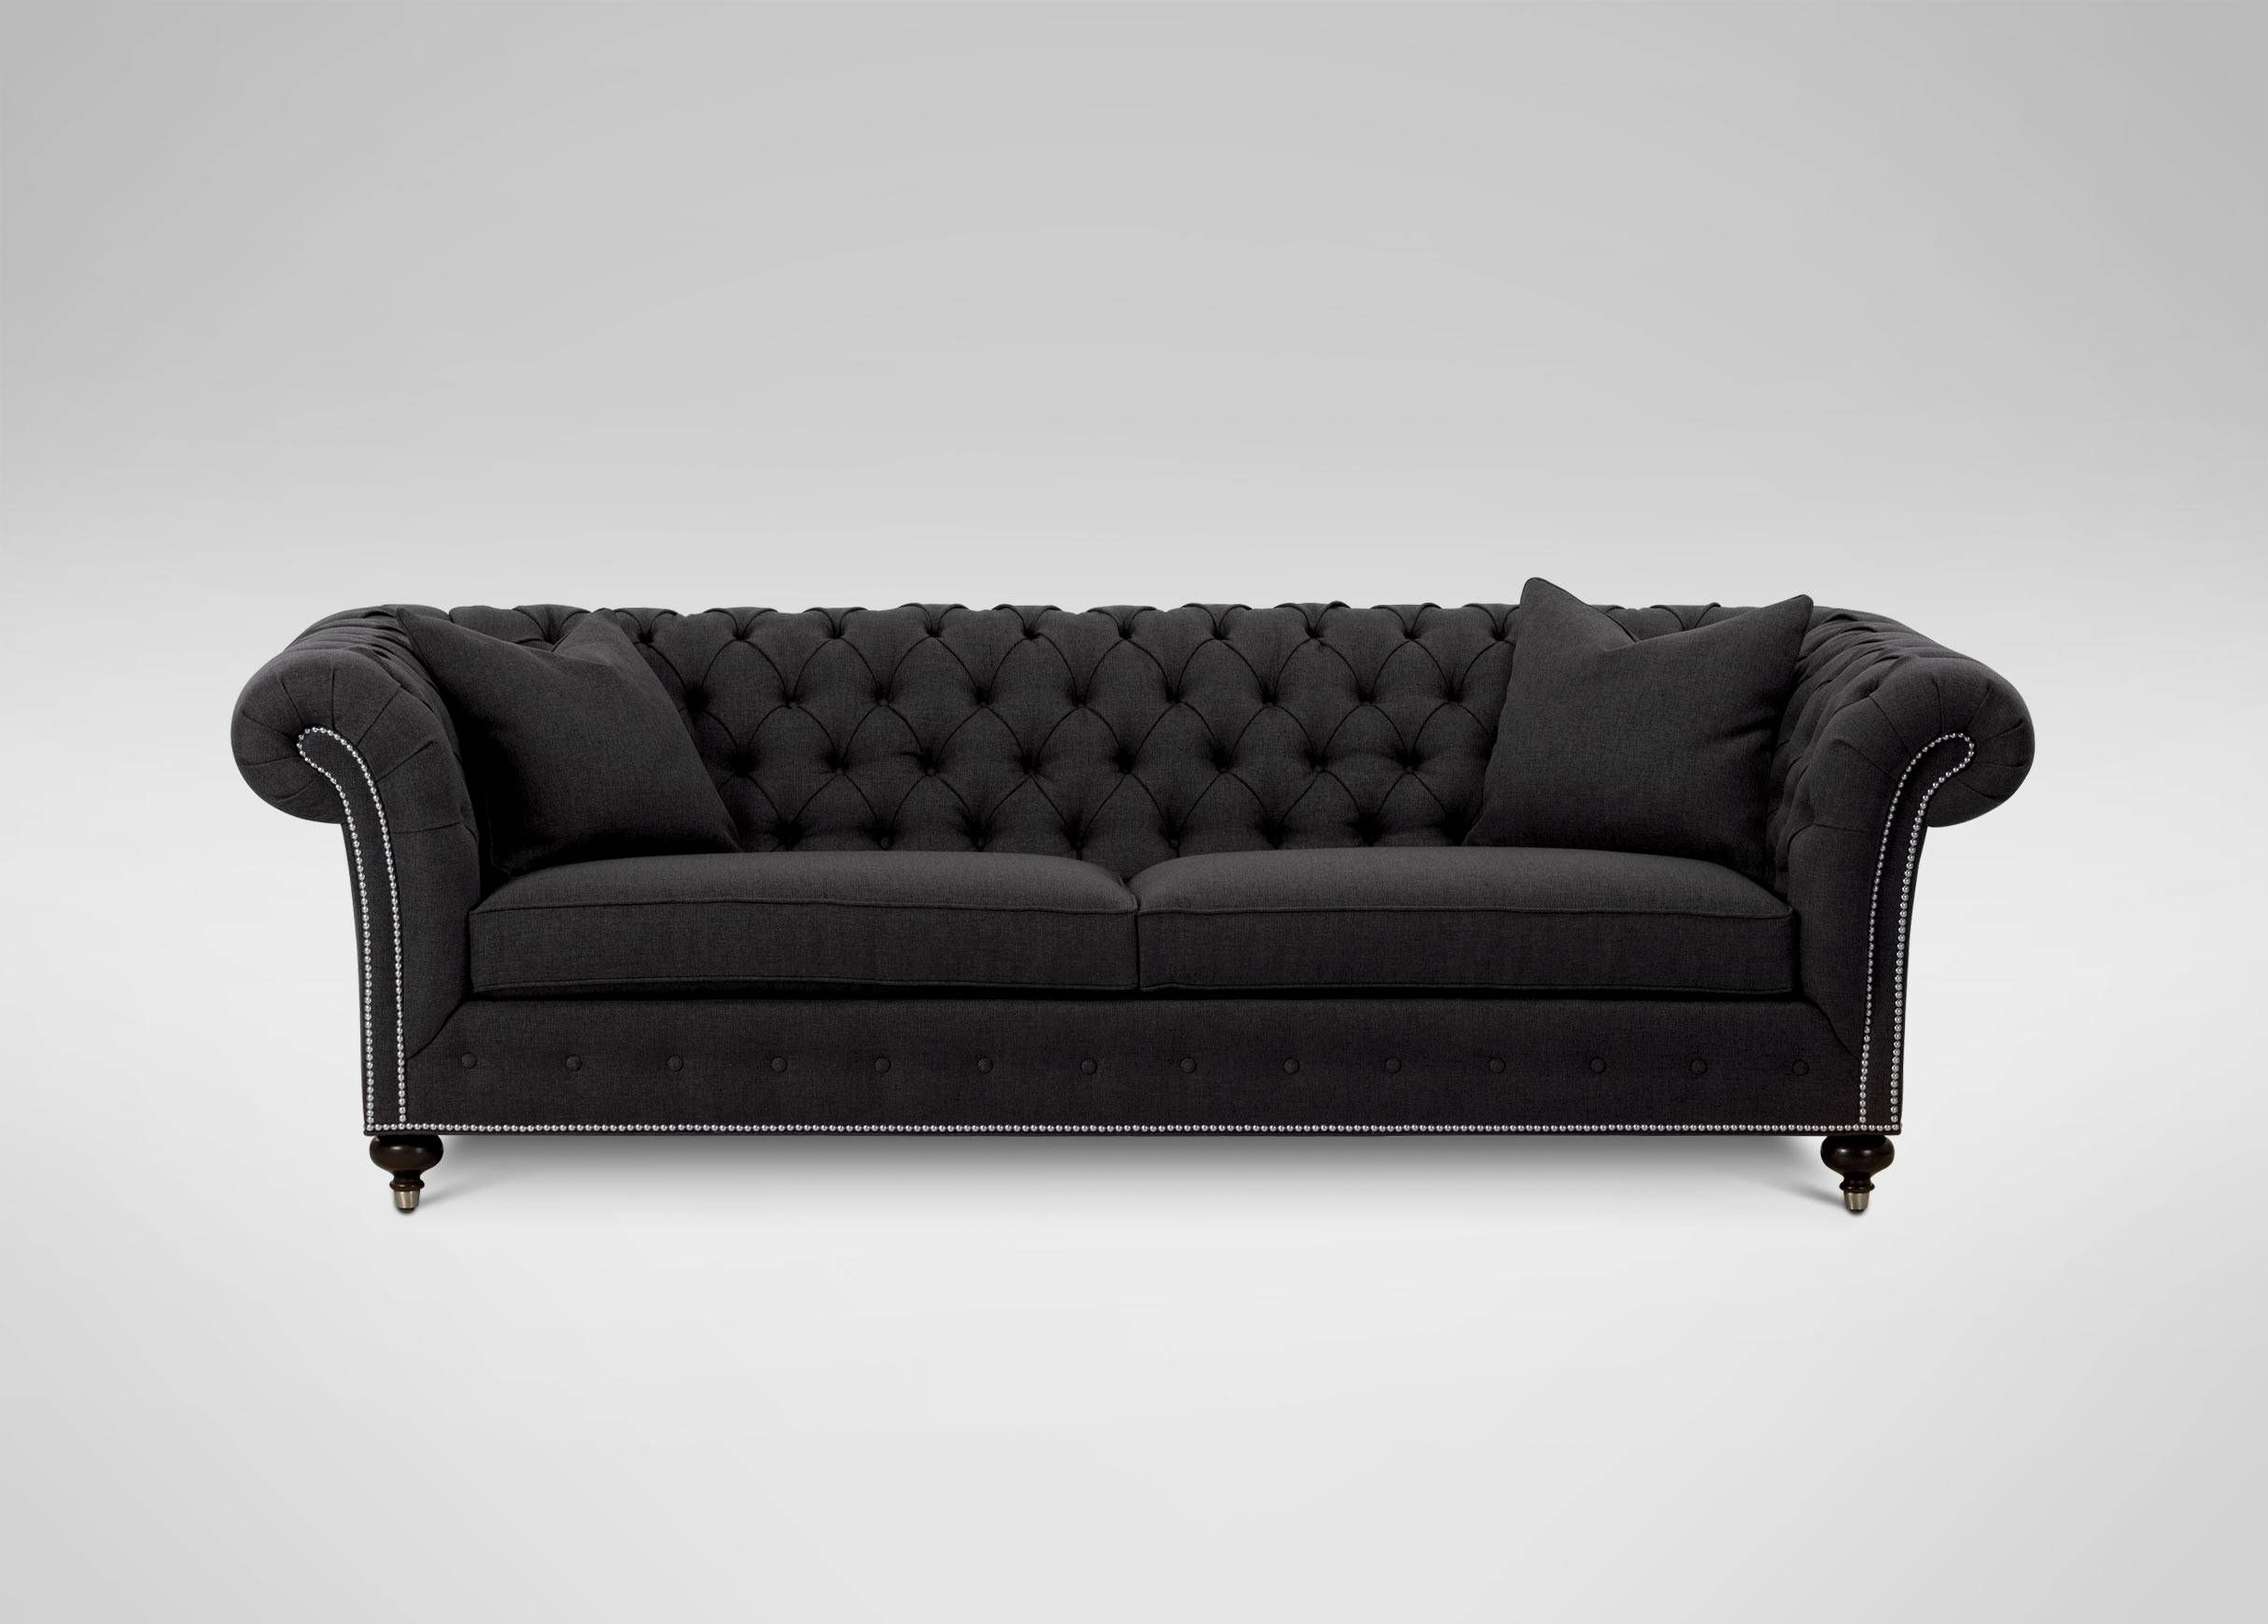 Mansfield Sofa | Sofas & Loveseats Throughout Ethan Allen Chesterfield Sofas (View 2 of 15)